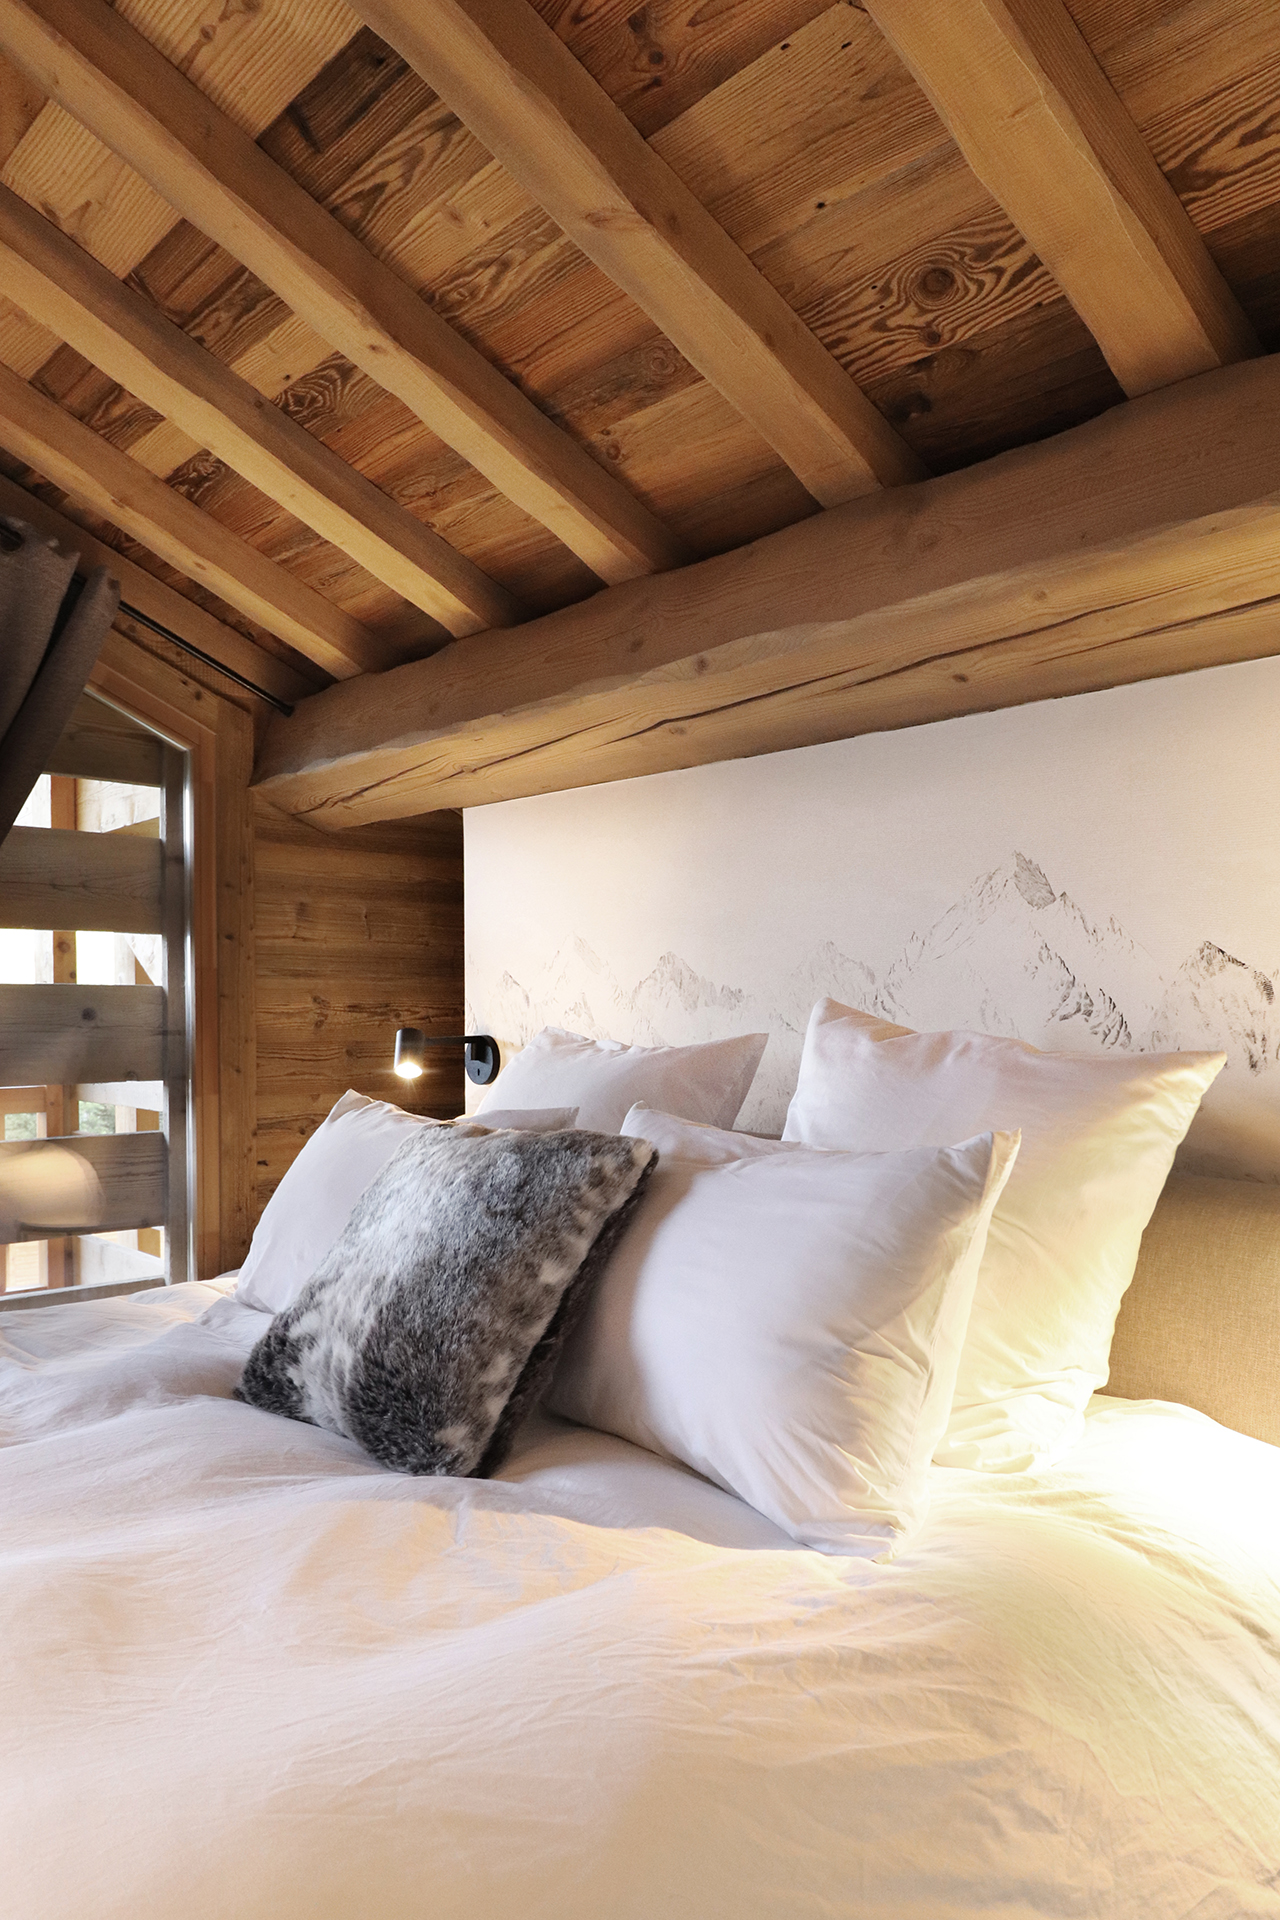 Projet chalet W chambre chalet bois moderne luxe